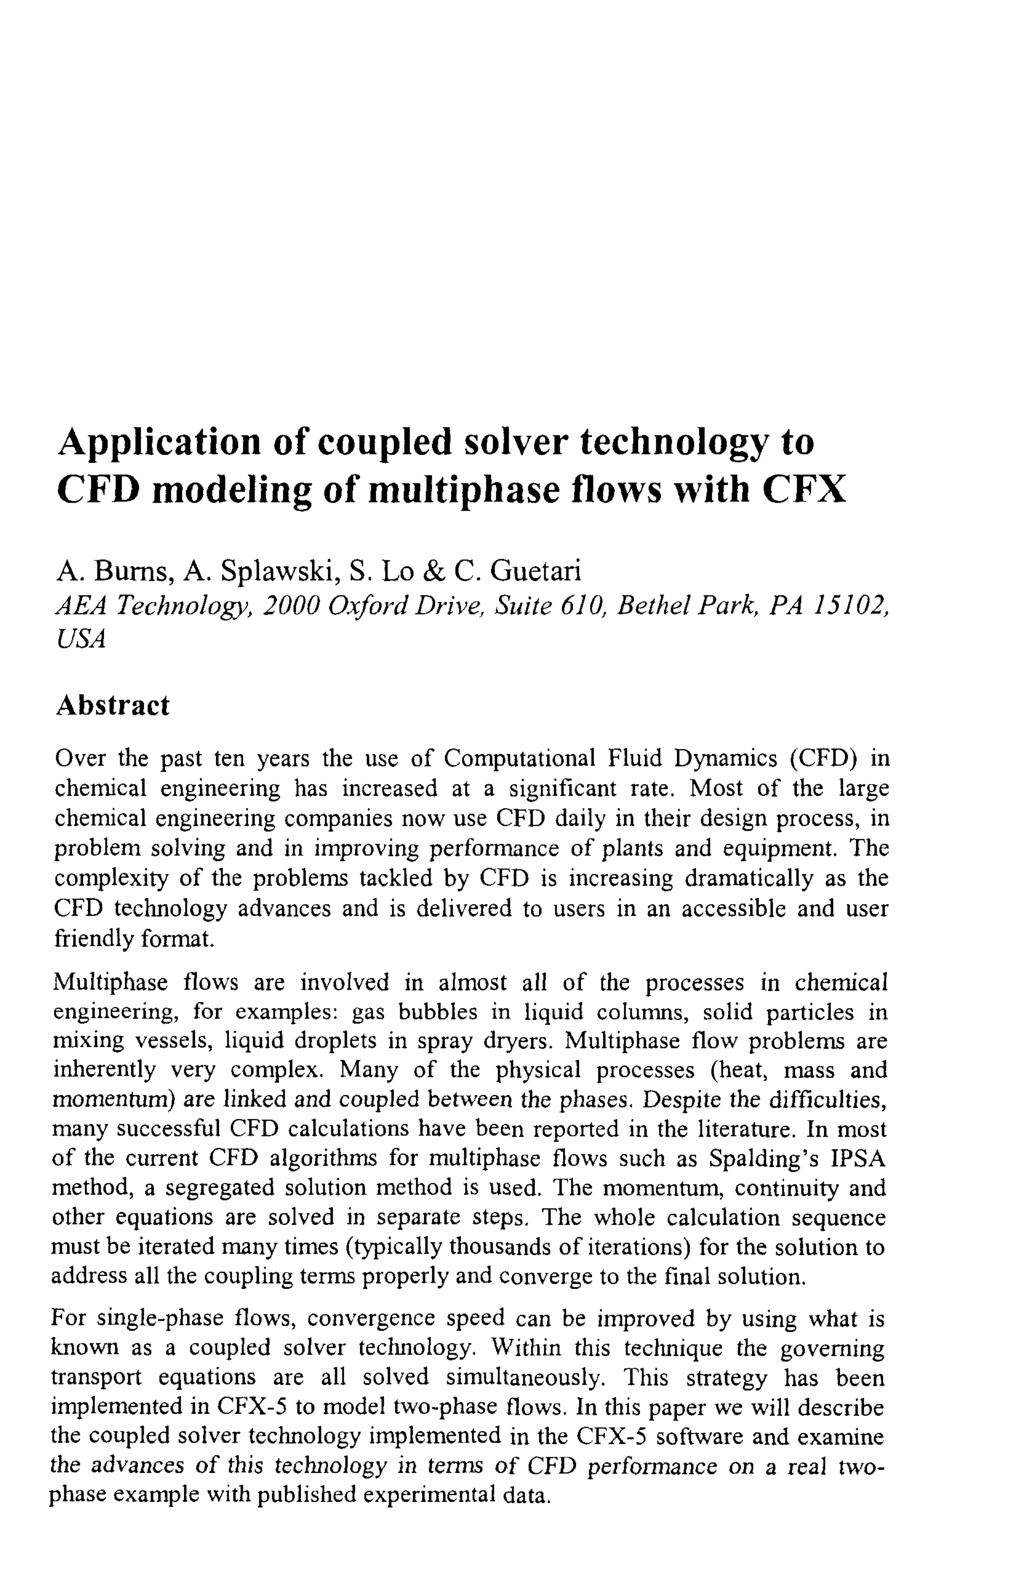 Application of coupled solver technology to CFD modeling of multiphase flows with CFX A. Bums, A. Splawski, S. Lo & C.